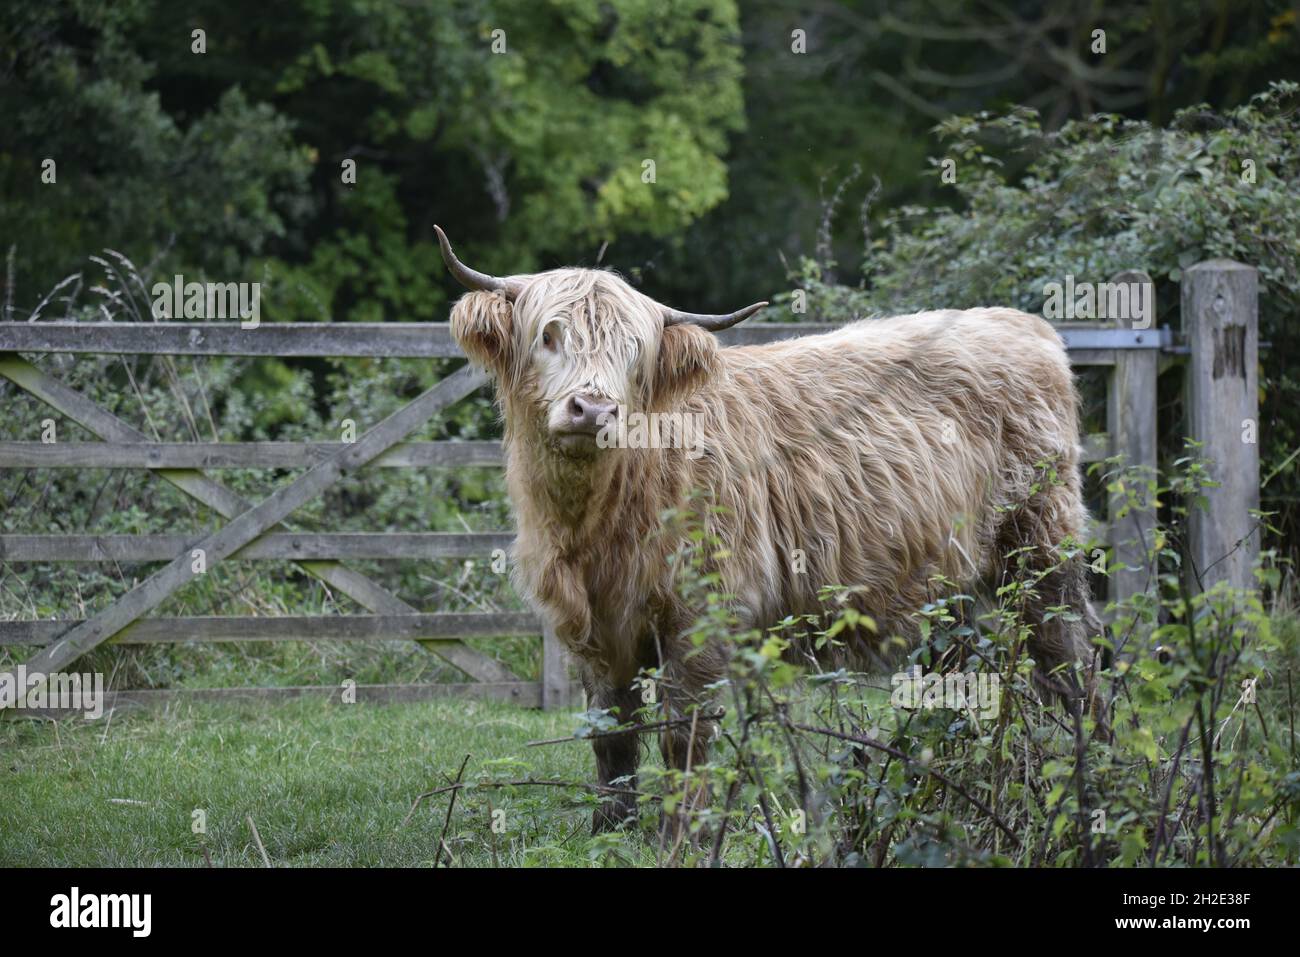 Left-Profile Close-Up Image of a Highland Cow, Facing Camera, on a Nature Reserve in Staffordshire, UK, in Autumn Stock Photo